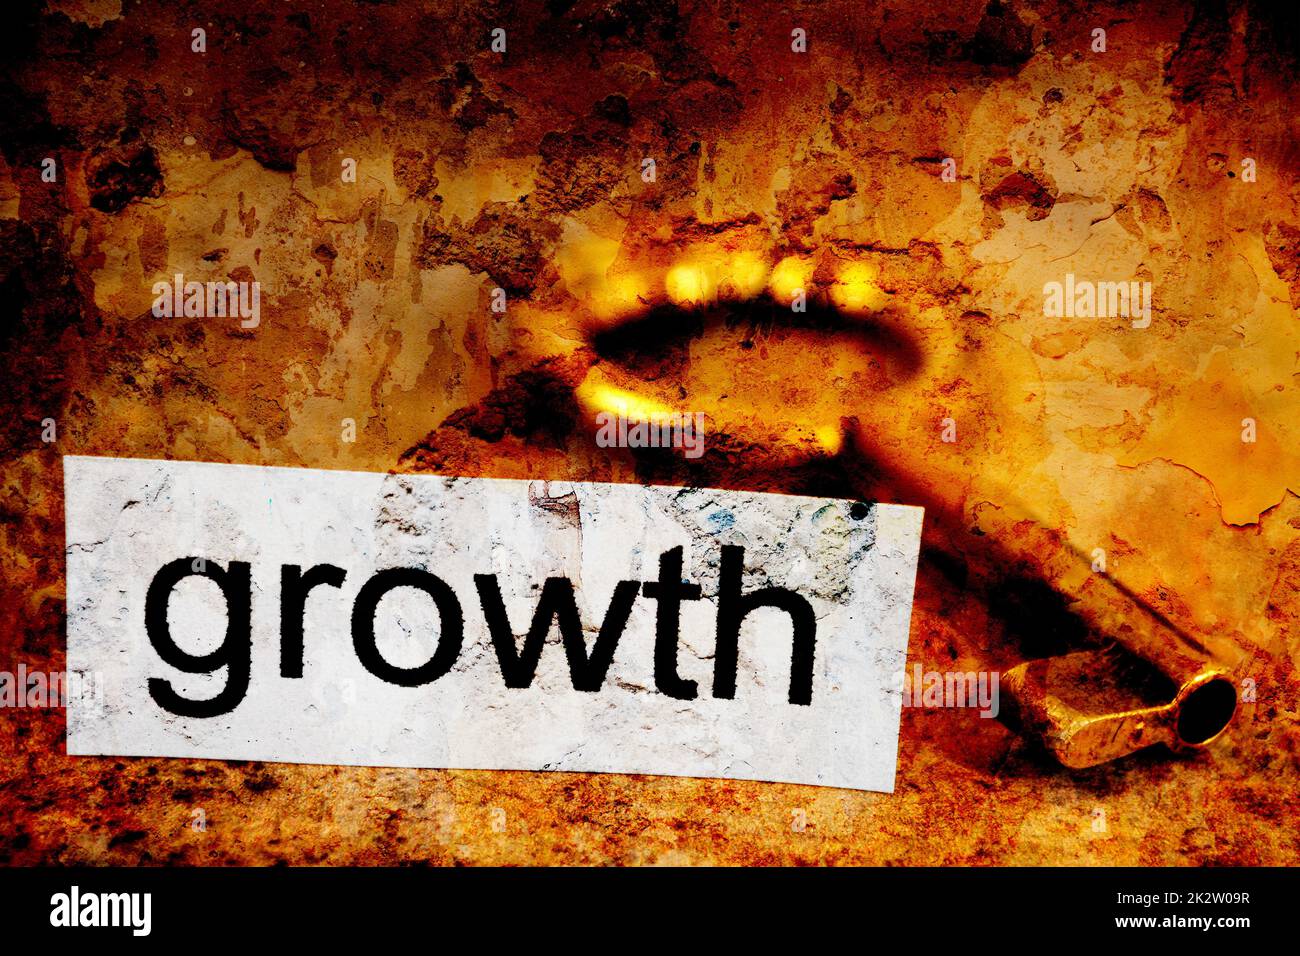 Growth concept Stock Photo